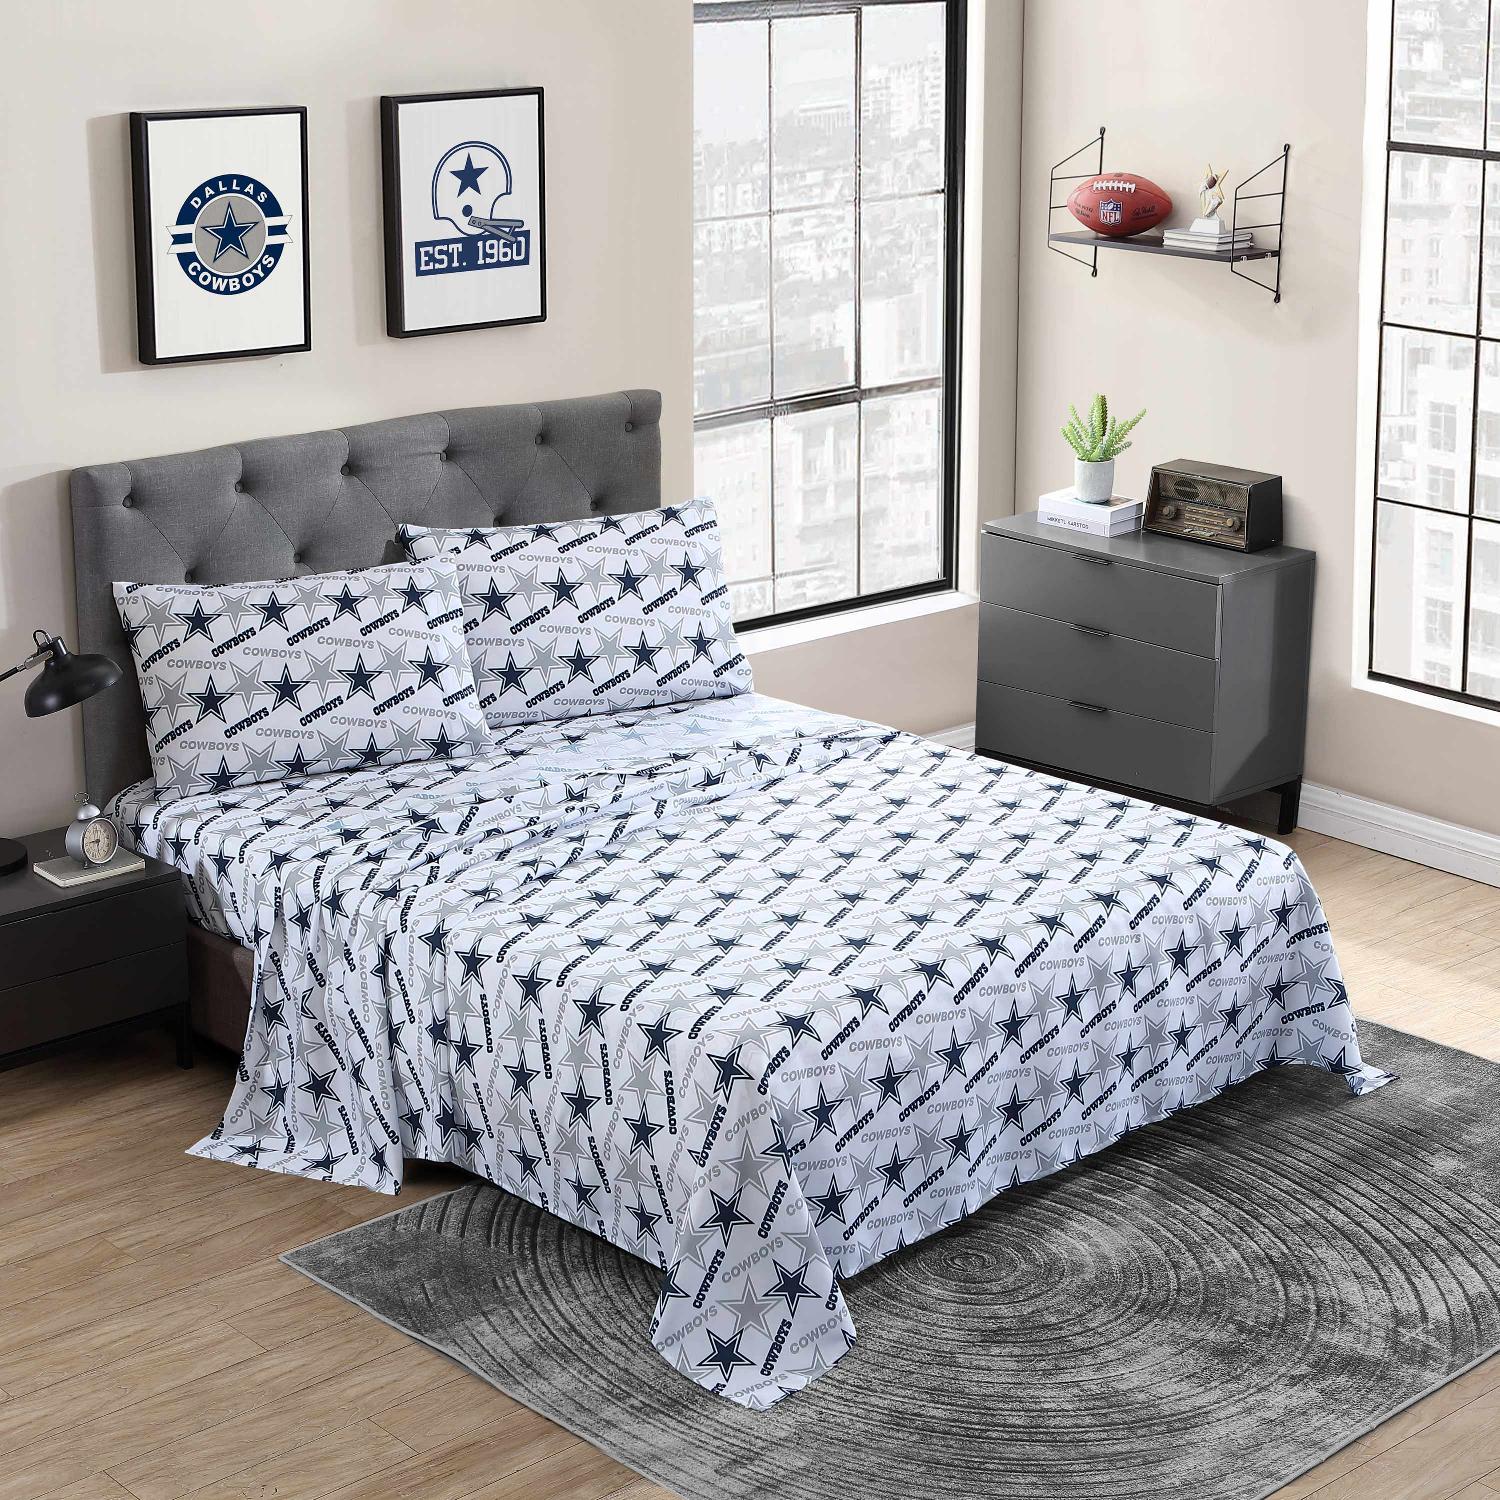 Dallas Cowboys NFL Officially Licensed 4-Piece Sheet Set - Bed